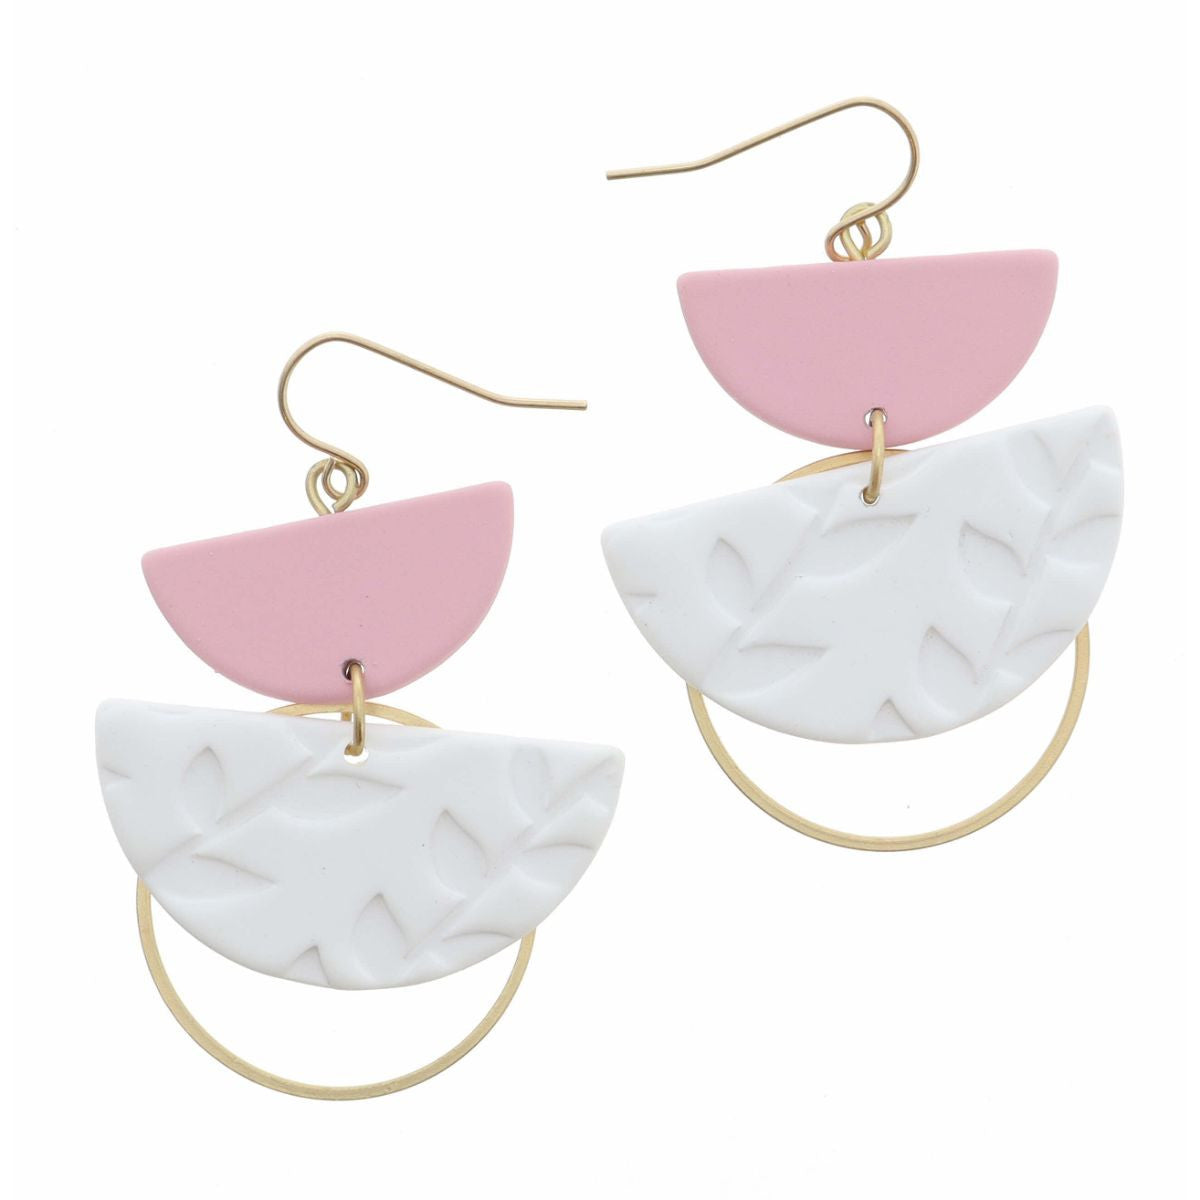 The Blush Earring Collection